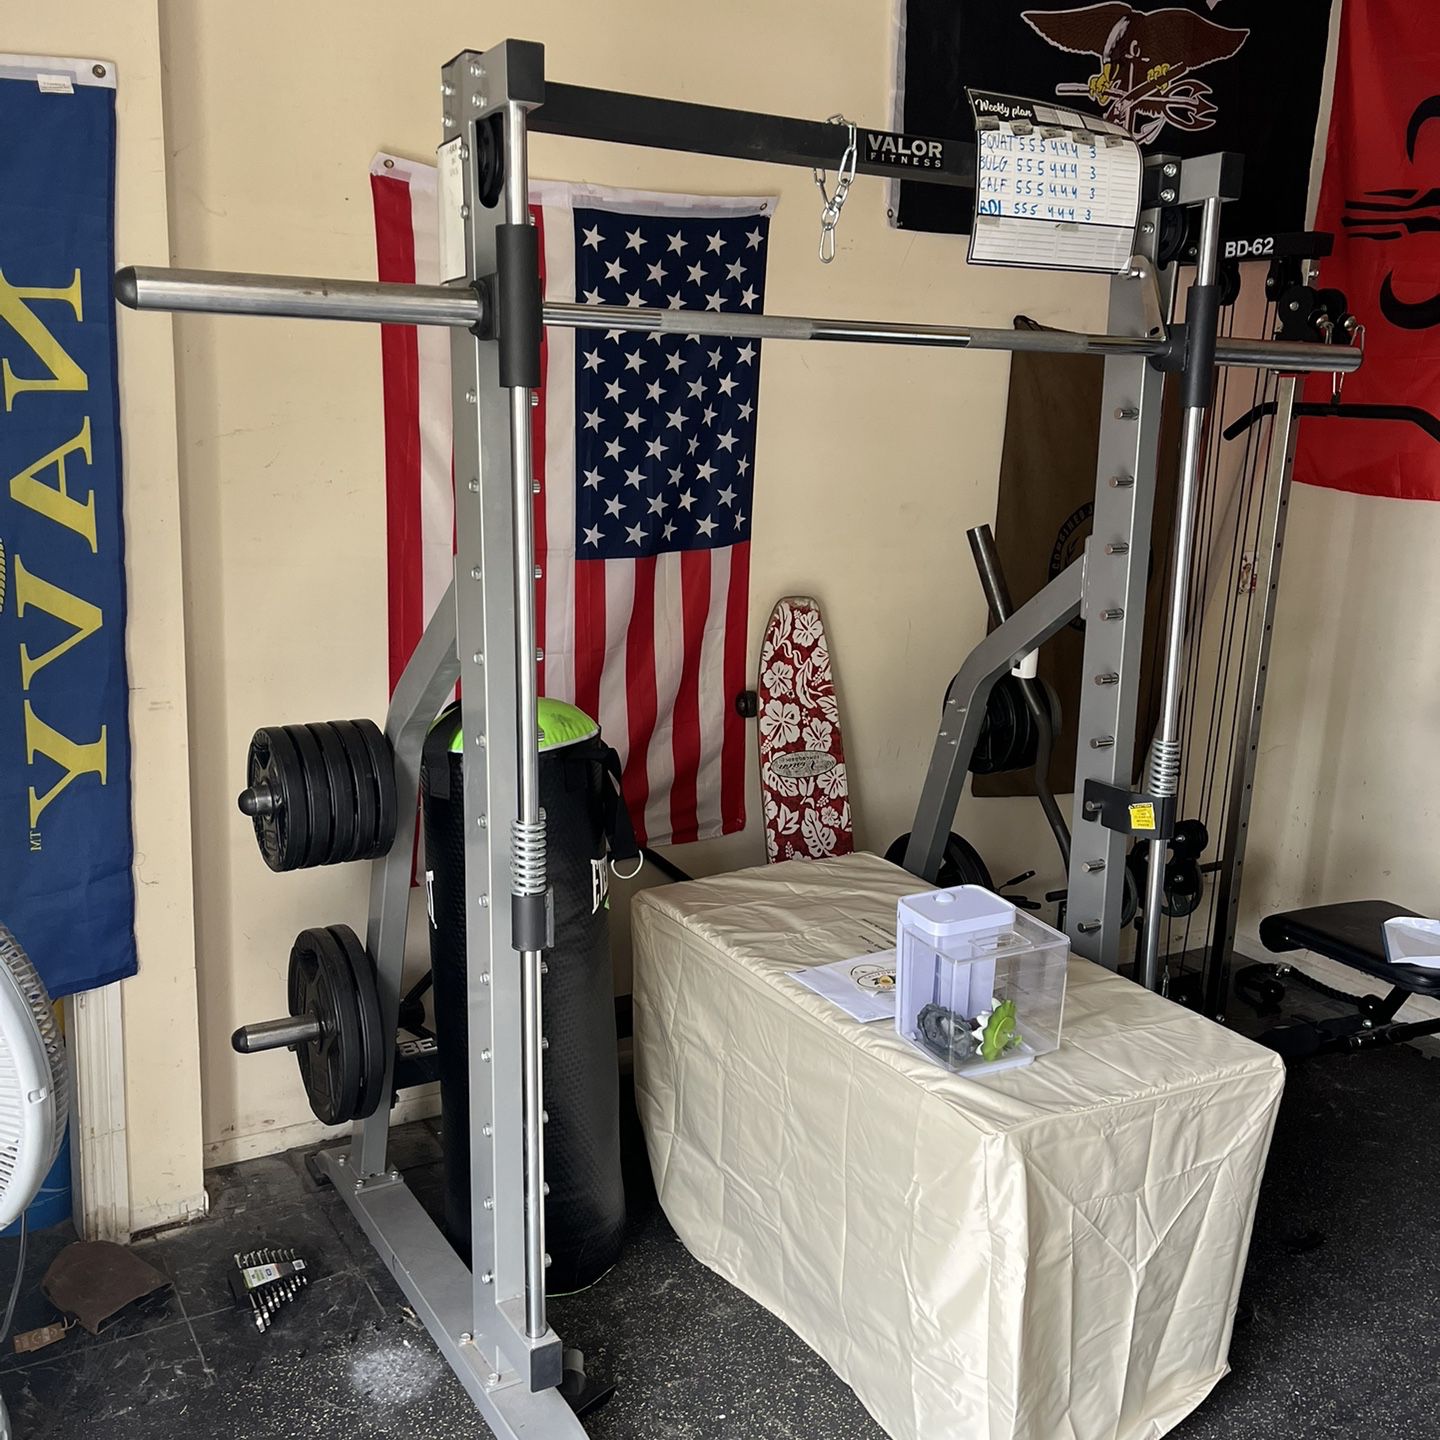 Valor Fitness BE-11 Smith Machine Squat Rack with Olympic Plate